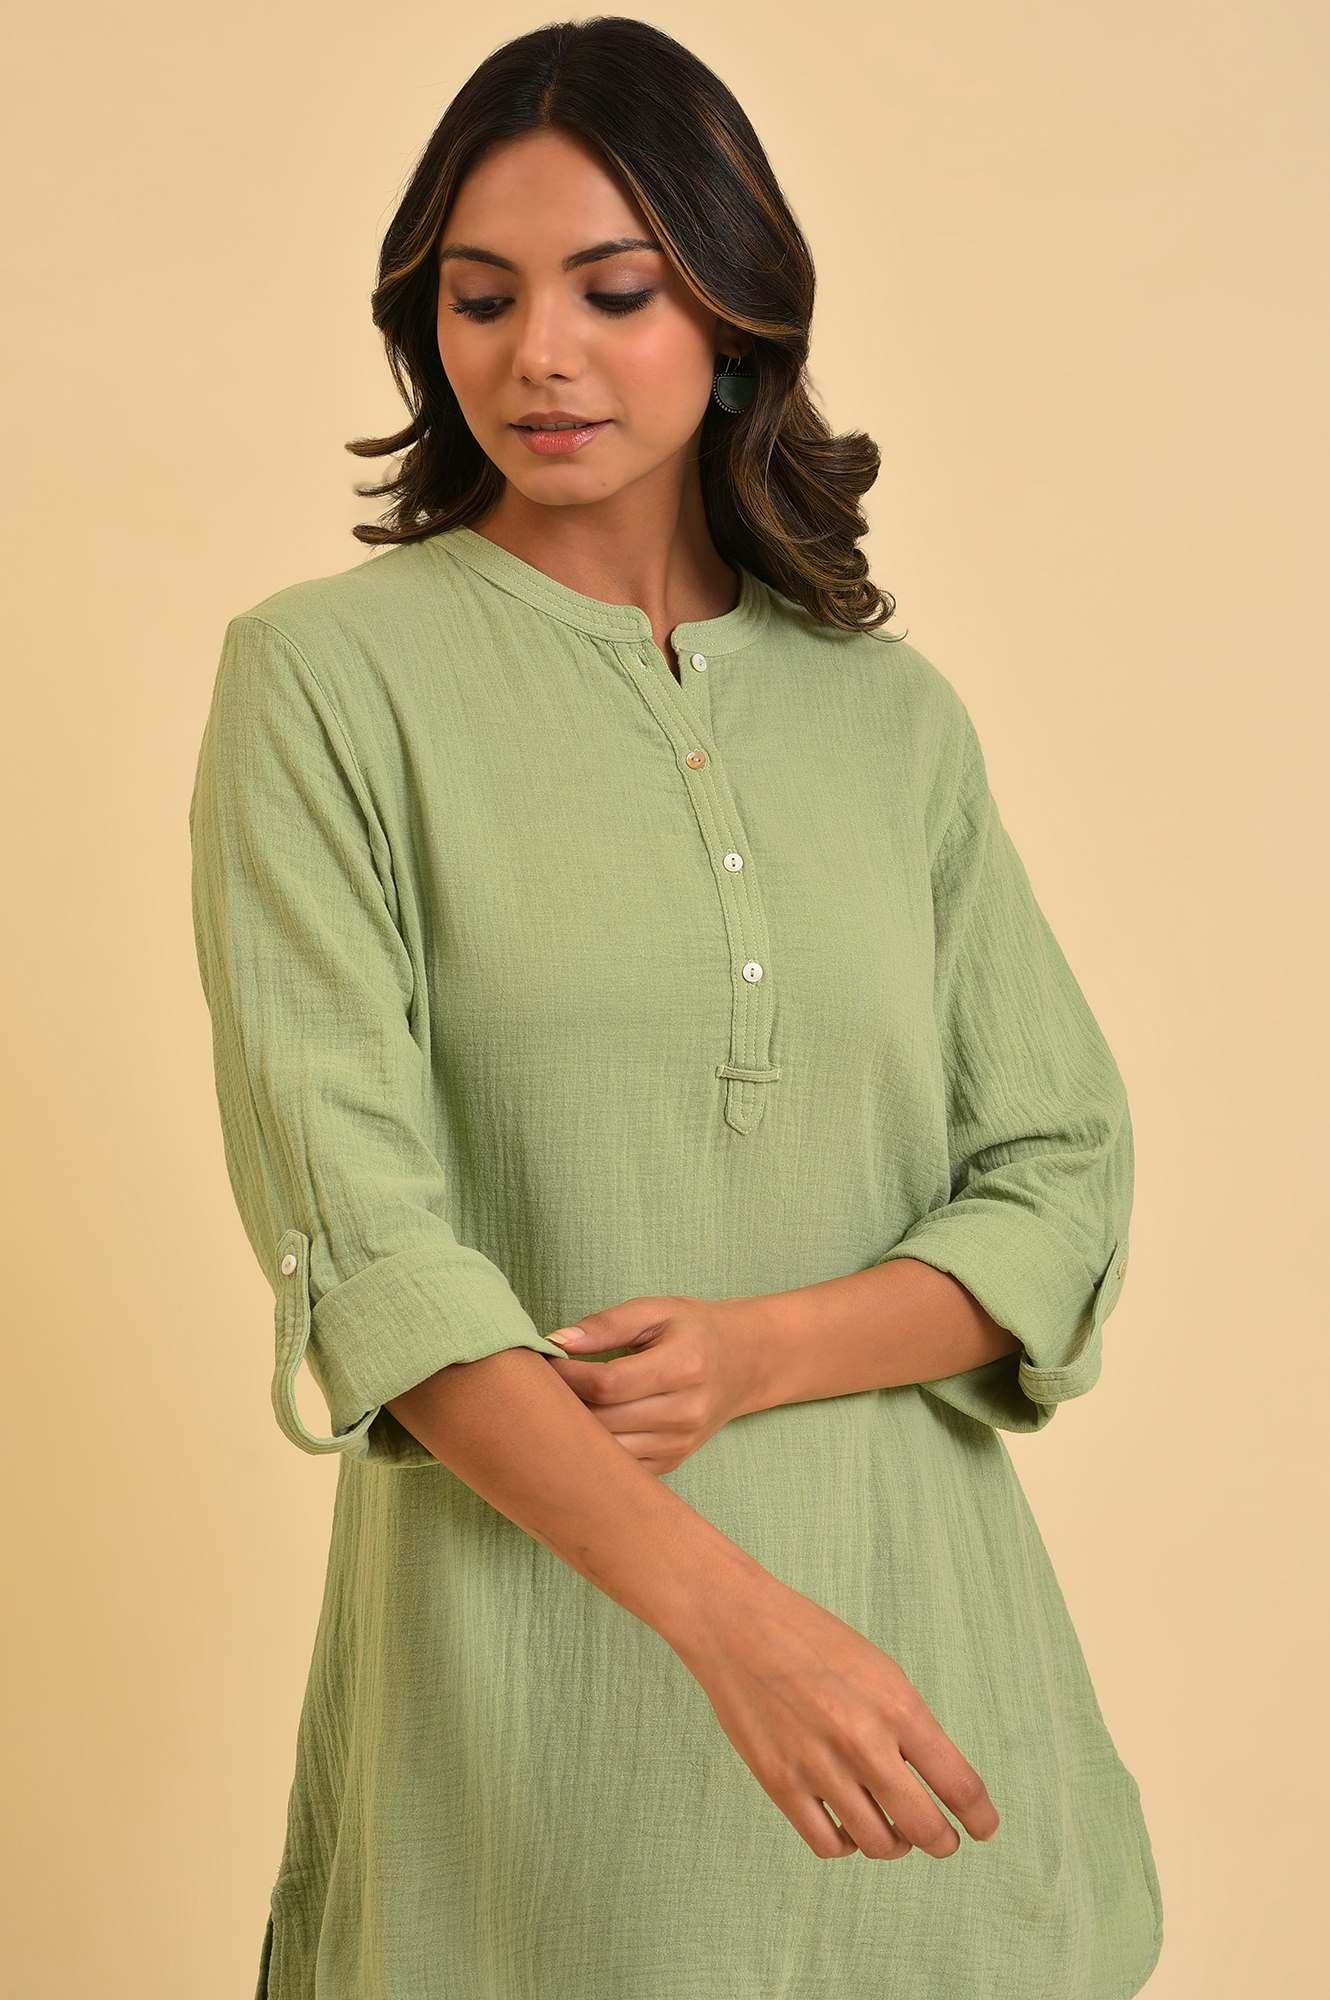 Green Solid Cotton Casual Top - wforwoman